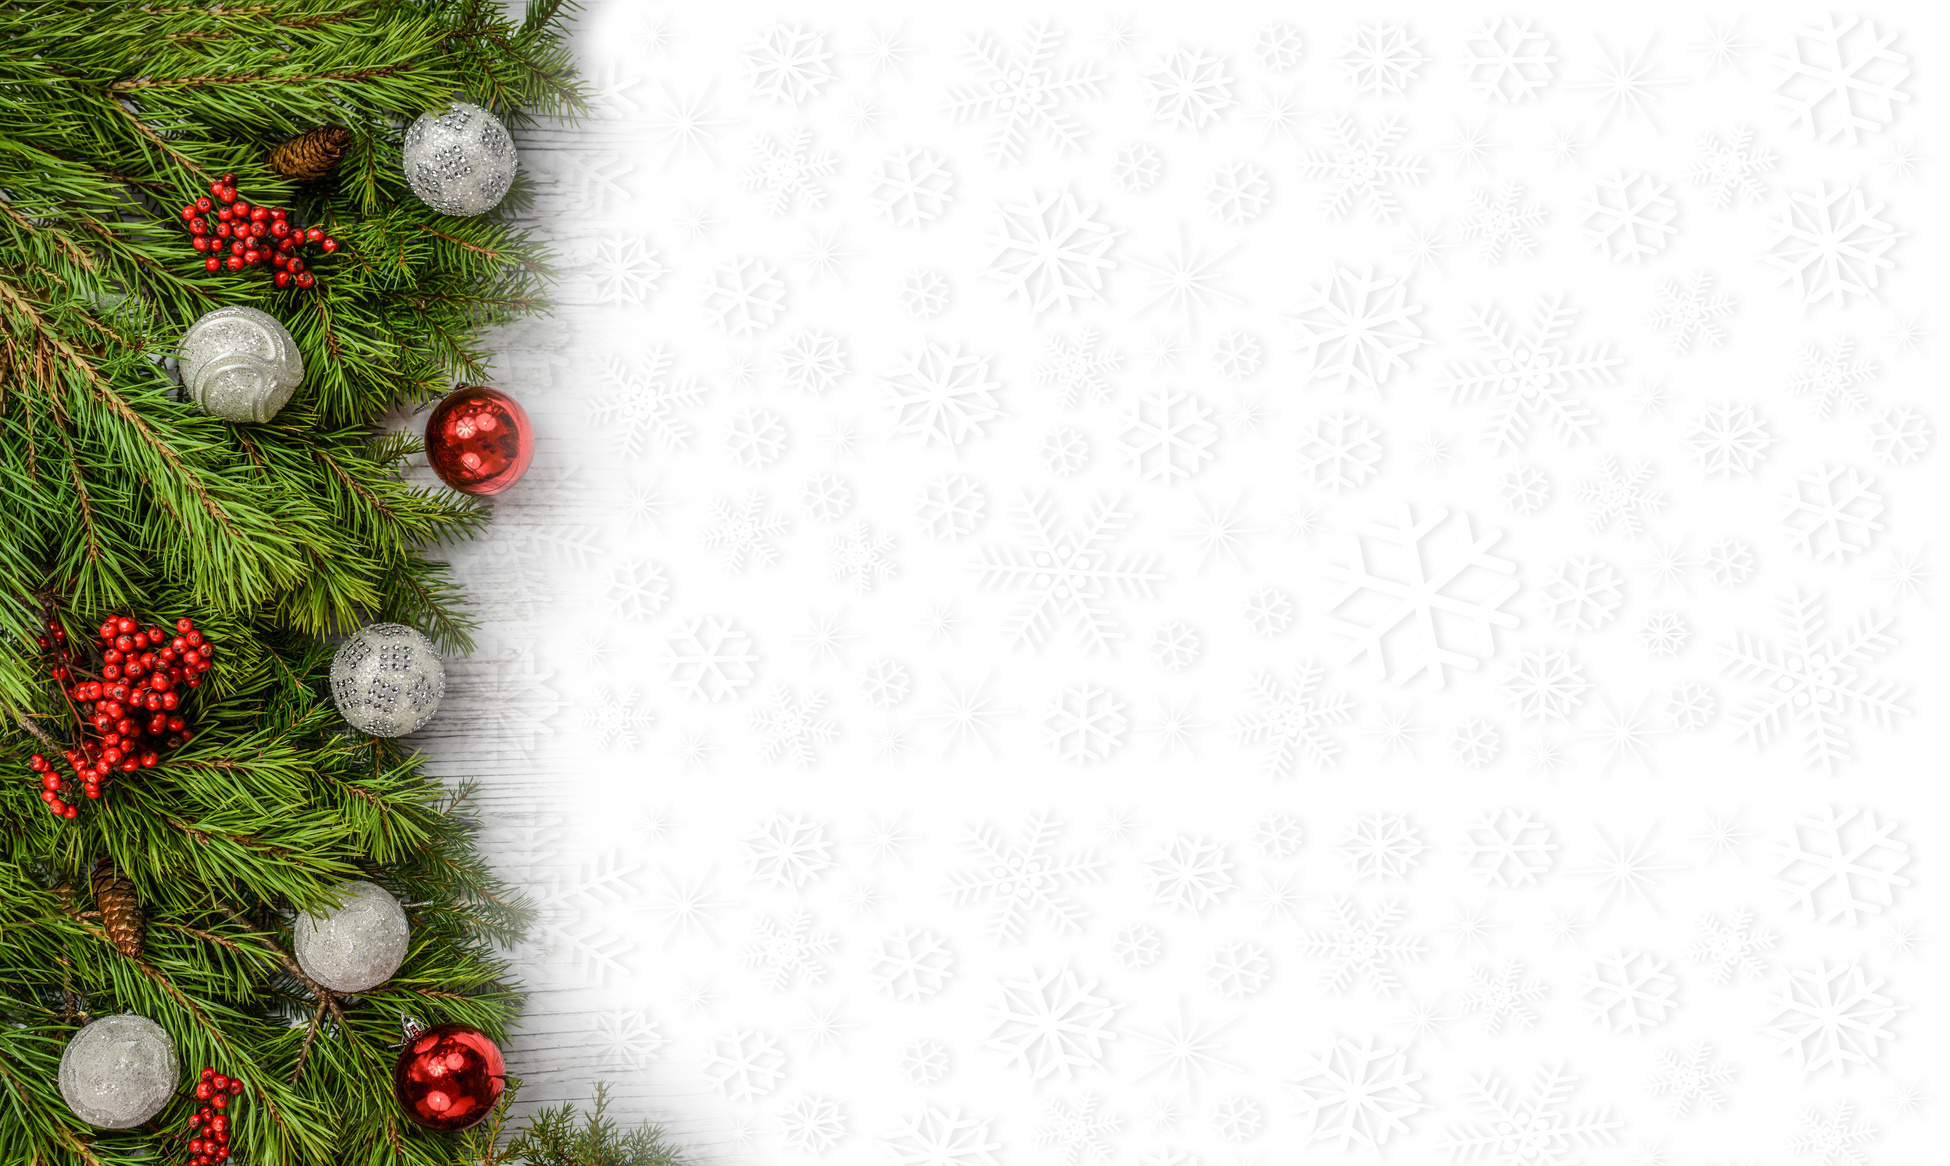 Design Background With Snowflakes And Christmas Pine On The Edge